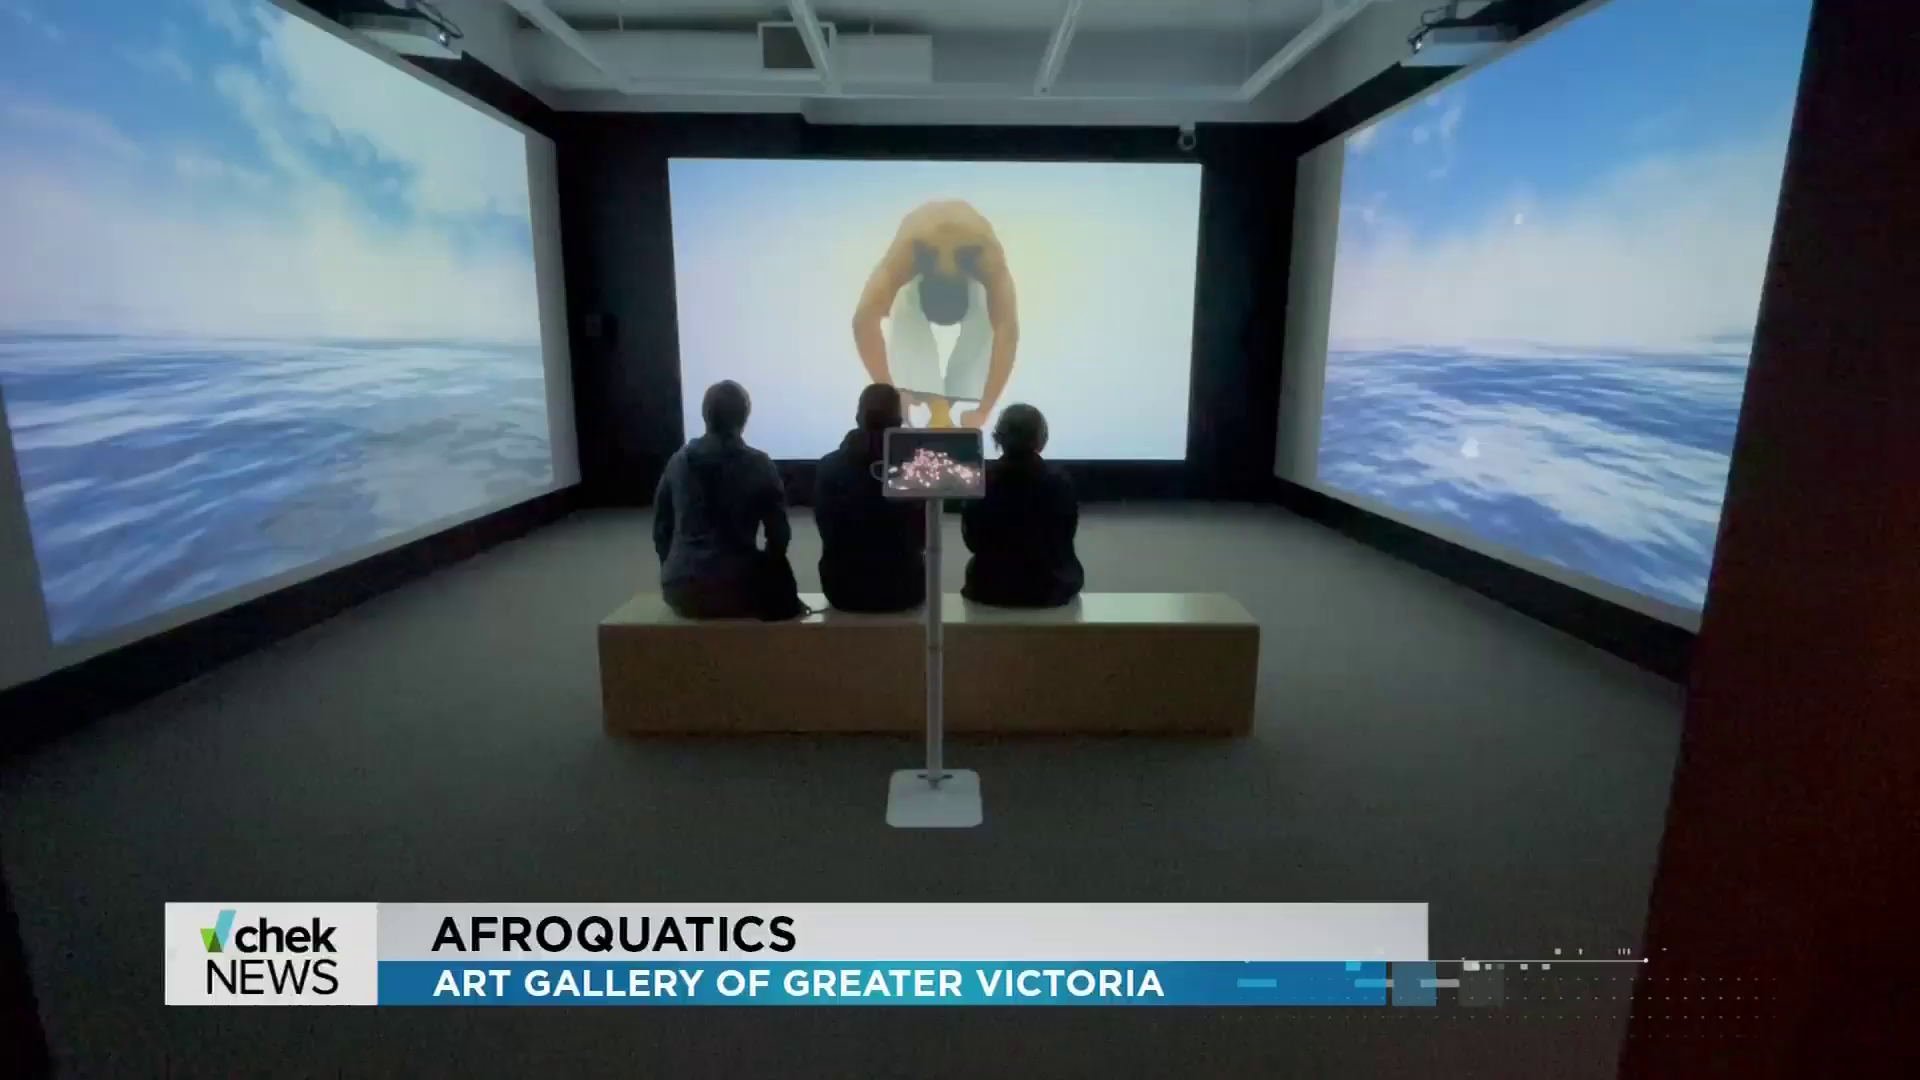 New interactive ‘Afroquatics’ art display comes to Art Gallery of Greater Victoria